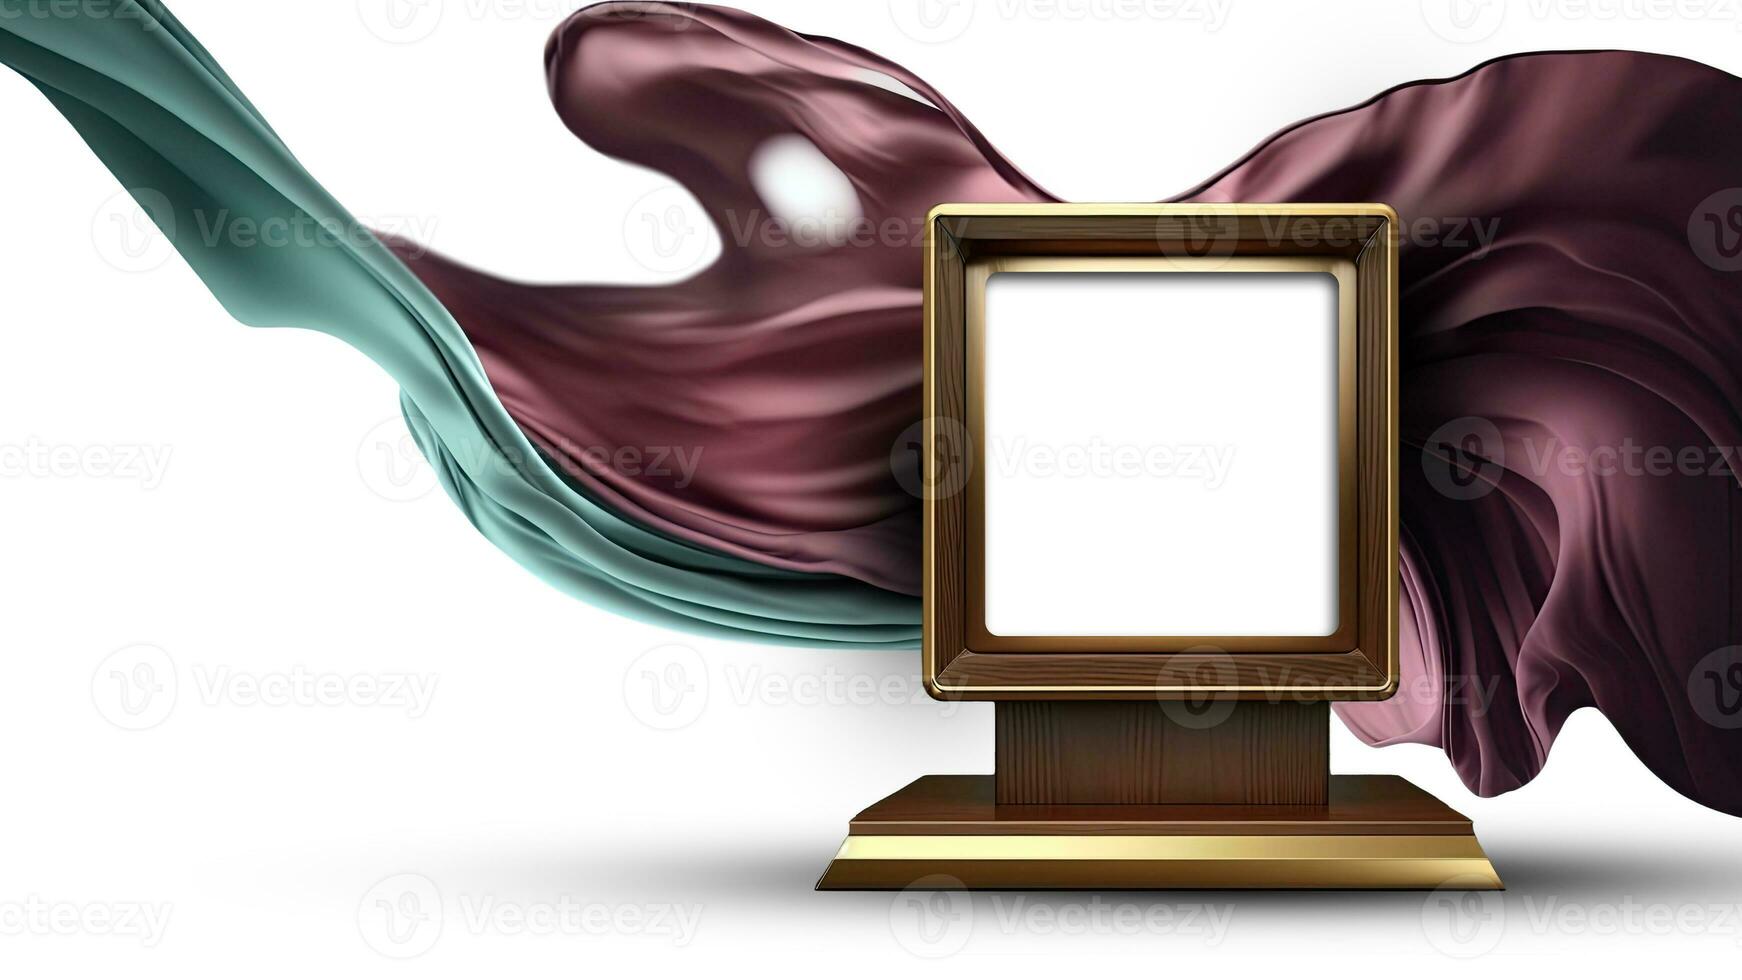 3D Render of Blank Golden Square Frame Stand or Trophy Mockup On Purple And Teal Silk Fabric Wave. photo